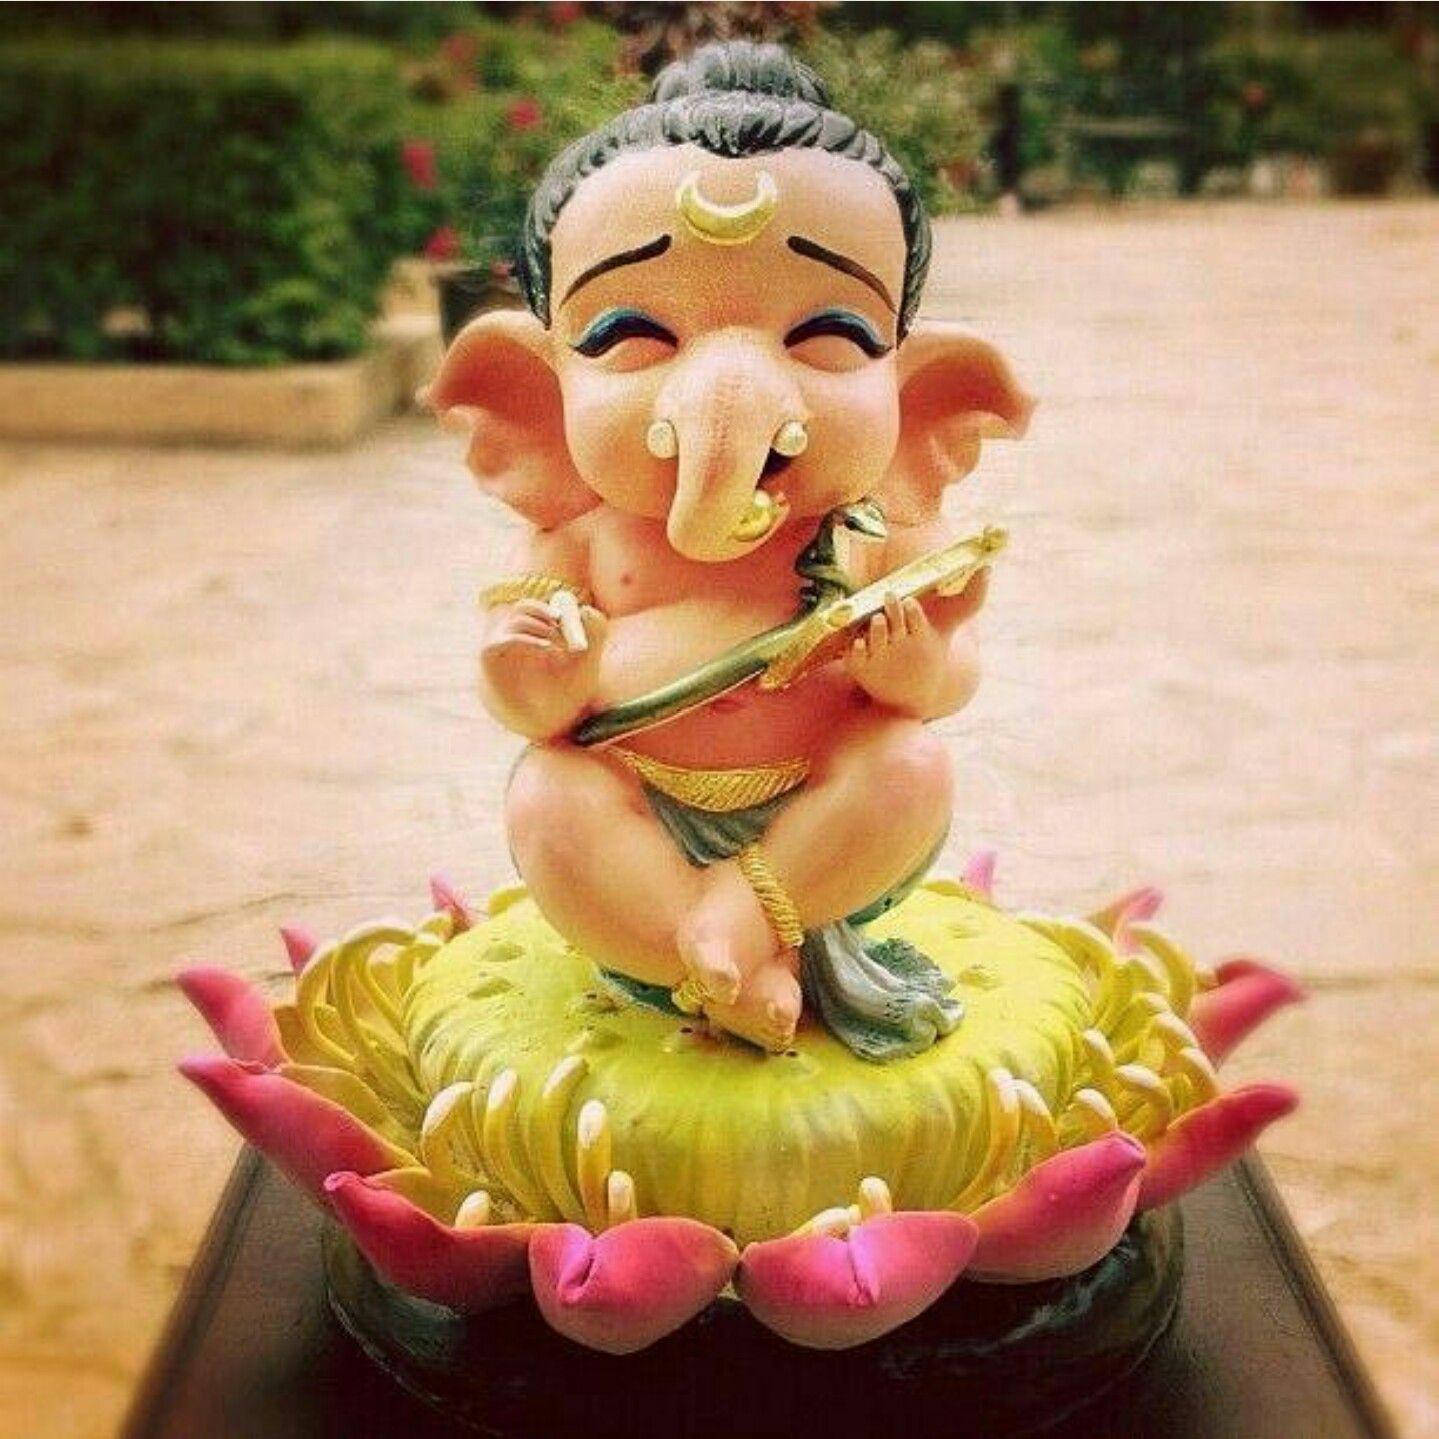 A Fascinating Image Depicts A Baby Statue Of Bal Ganesh Smiling While Sitting On A Lotus Flower Stamen. Wallpaper